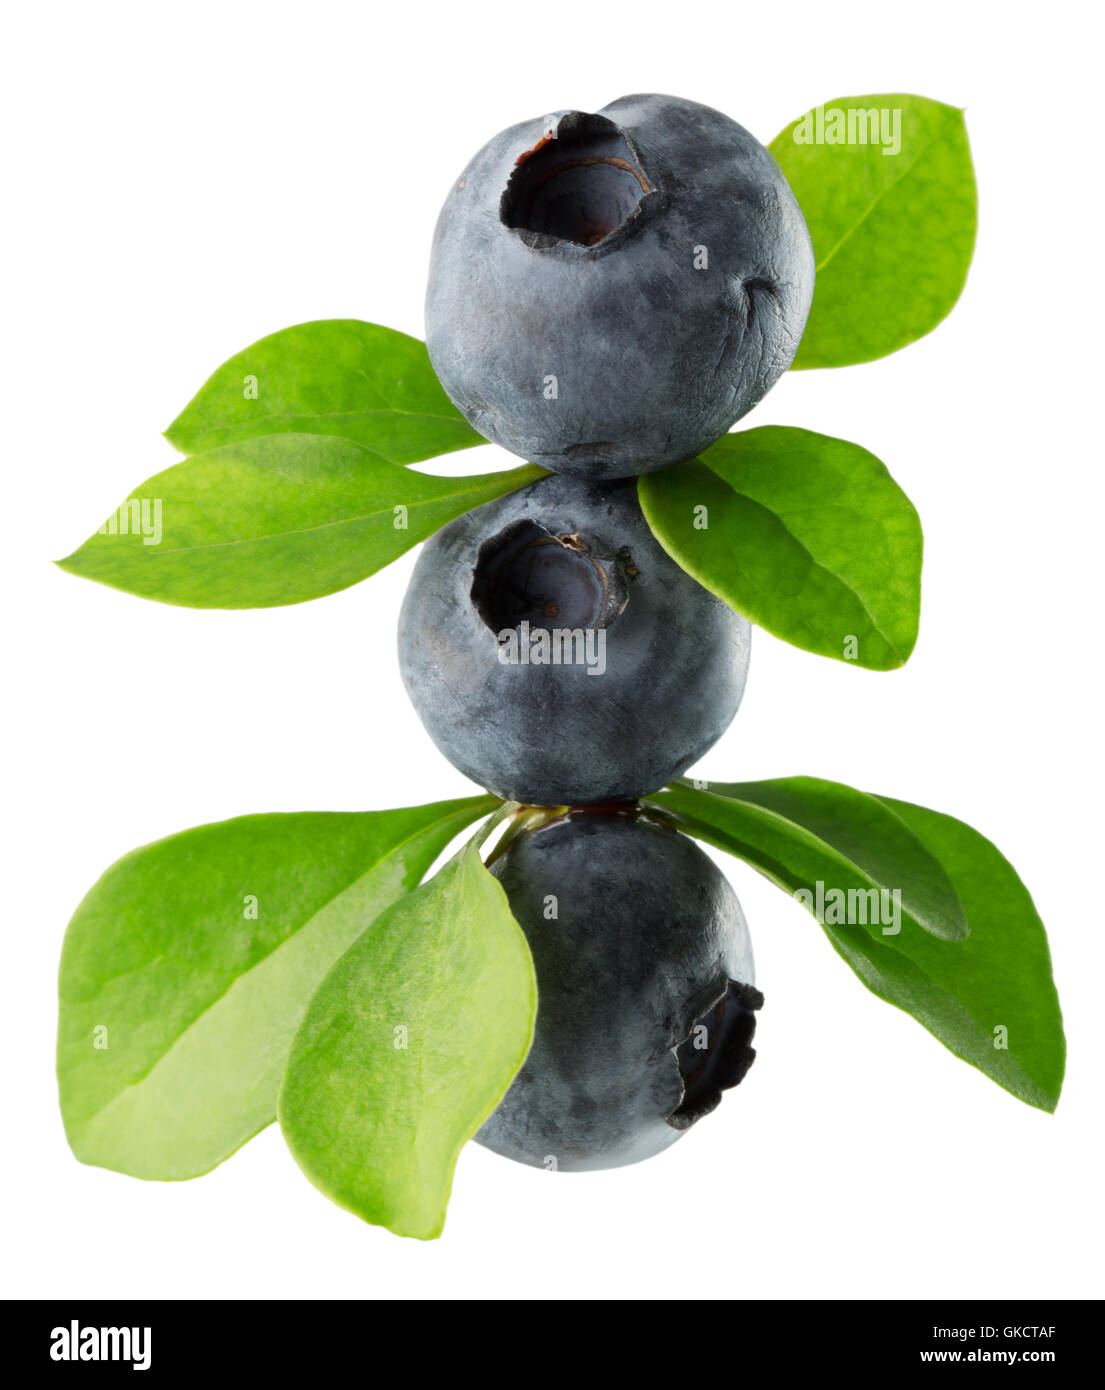 blueberries isolated on the white background. Stock Photo